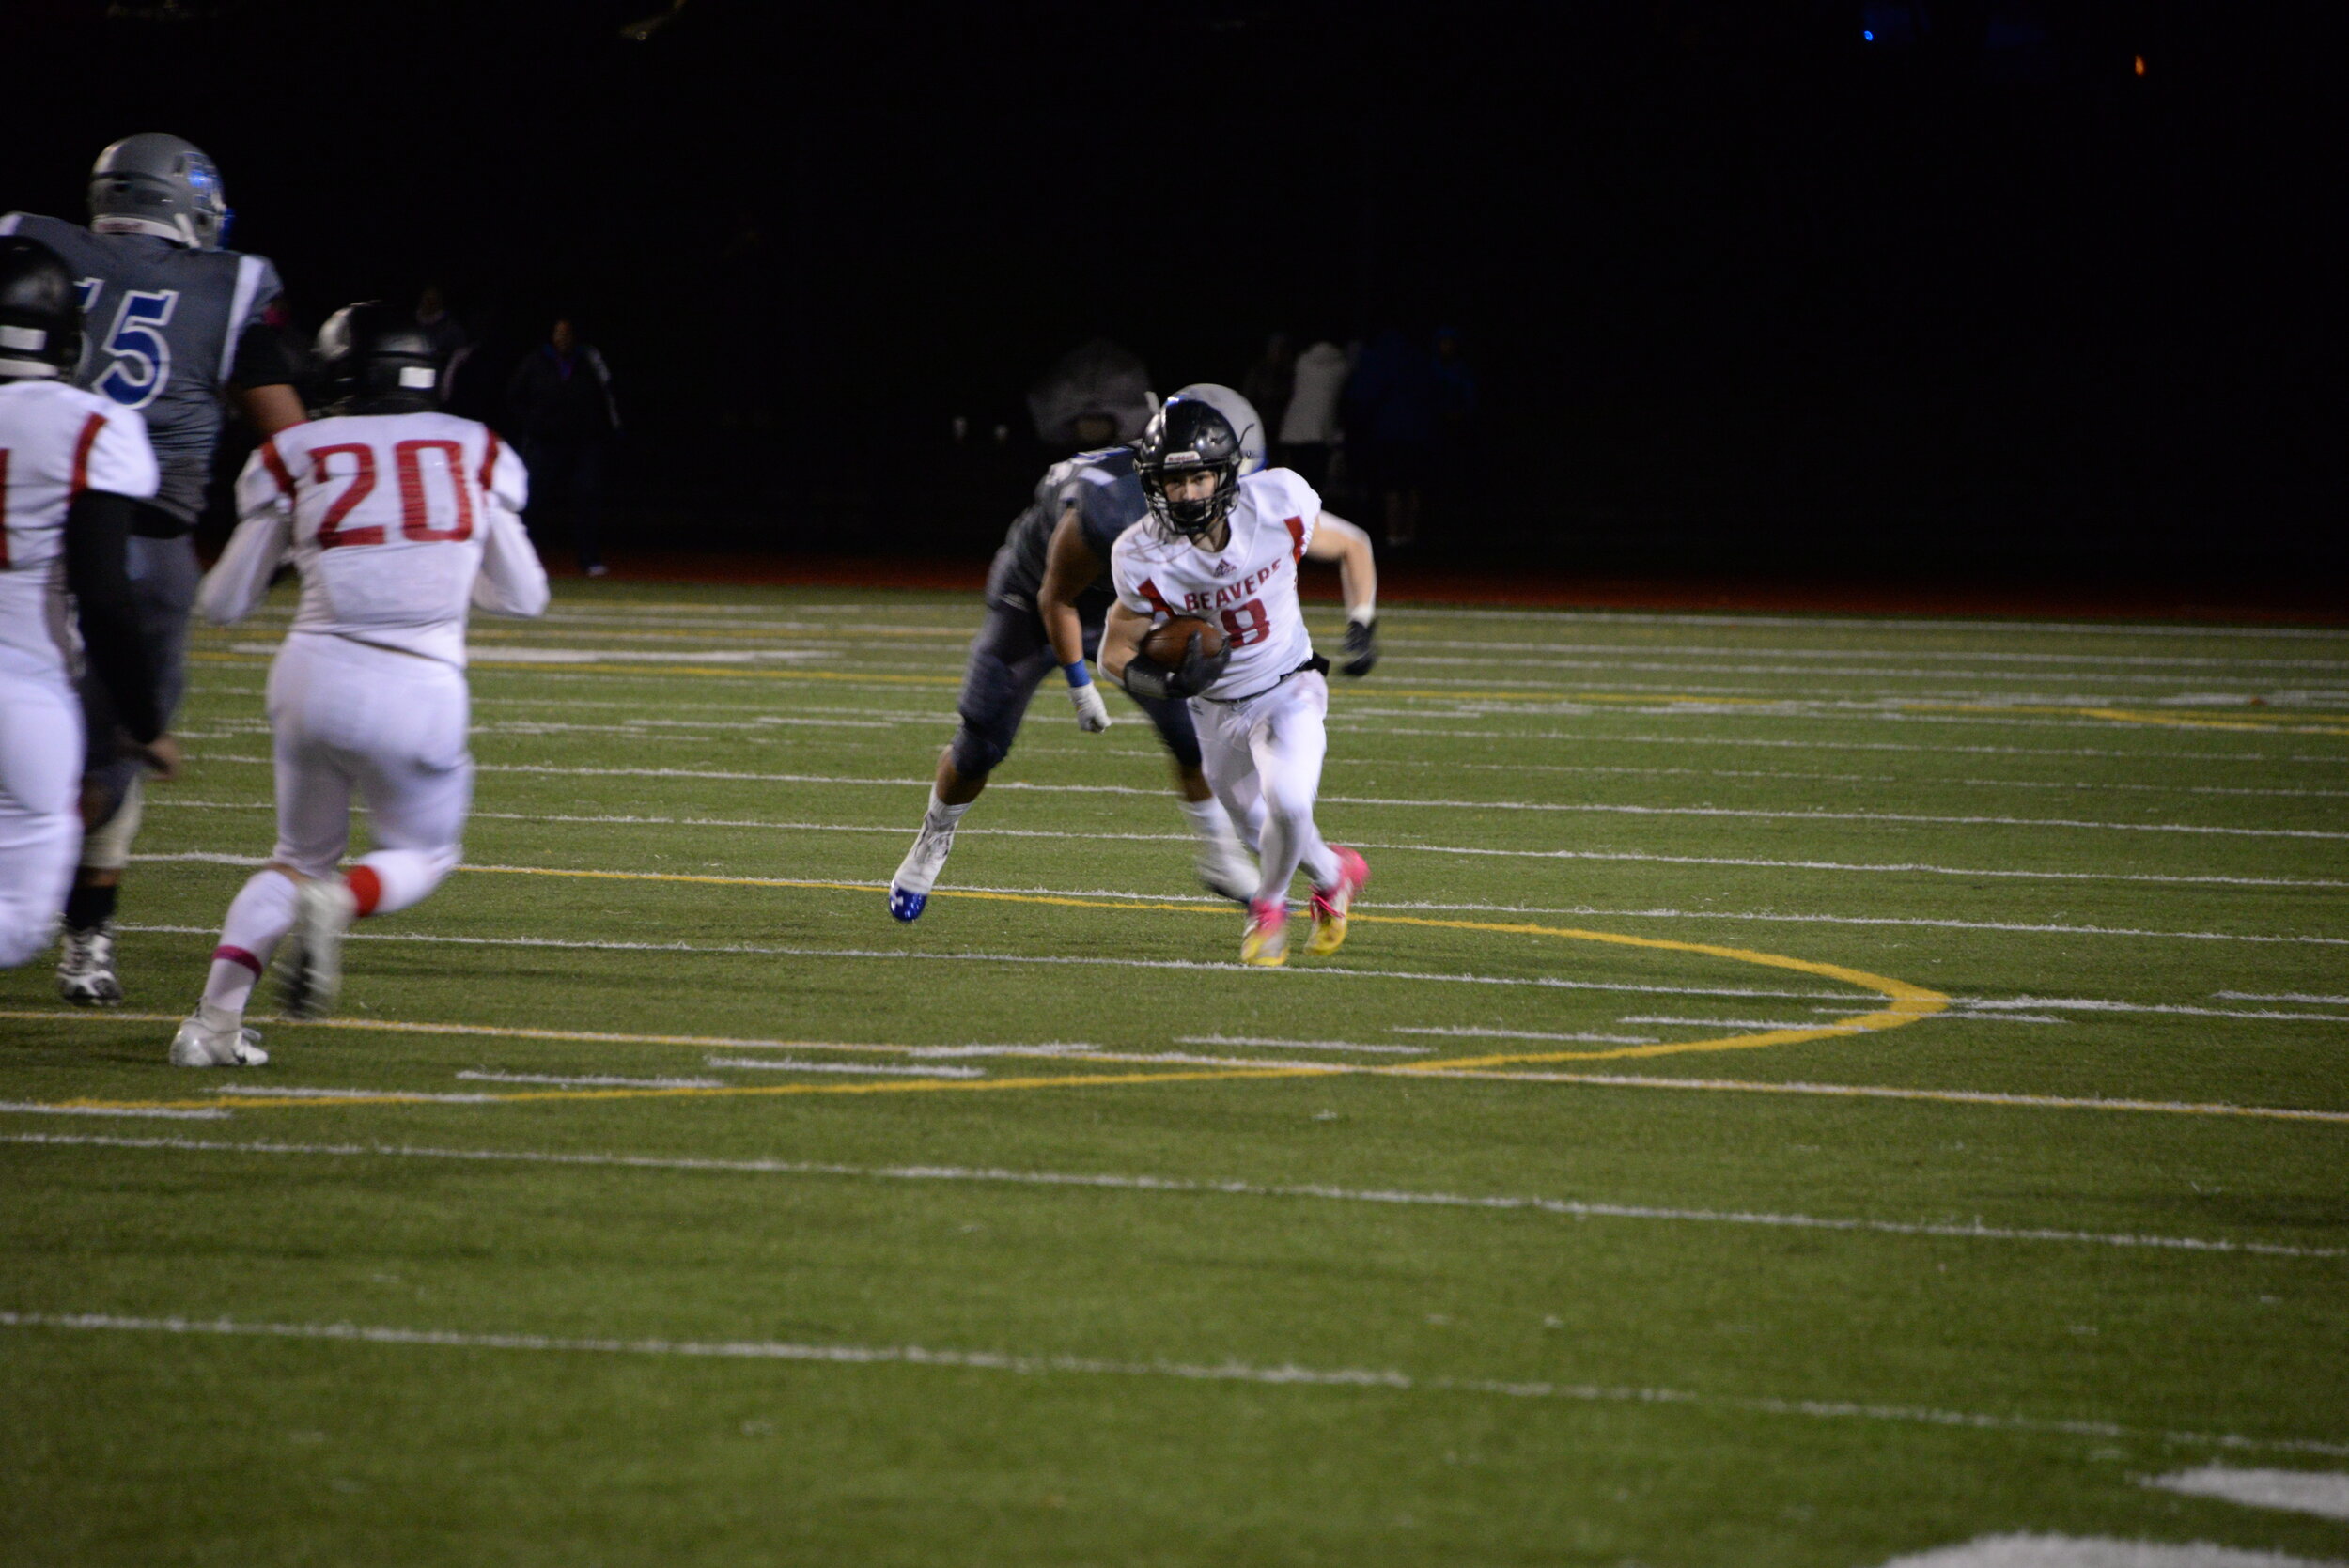 In the game against Ingraham on Oct. 18, senior George Blue, who scored three of the touchdowns, runs past the Ingraham opponents. Beavers won 29-13 (Ian Anderson)